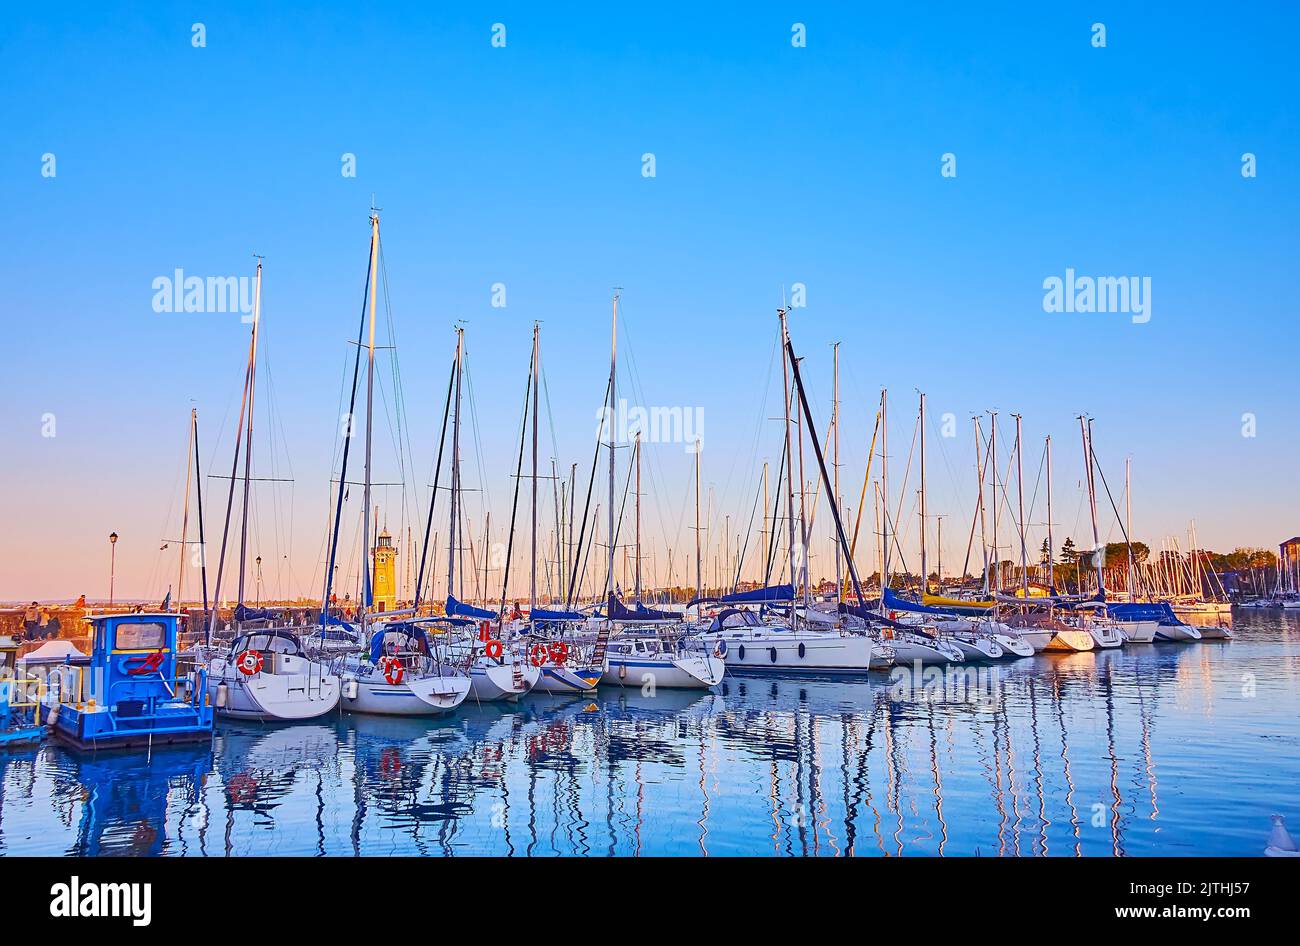 The line of the moored sail yachts in port with a lighthouse and sunset sky in background, Desenzano del Garda, Lake Garda, Italy Stock Photo